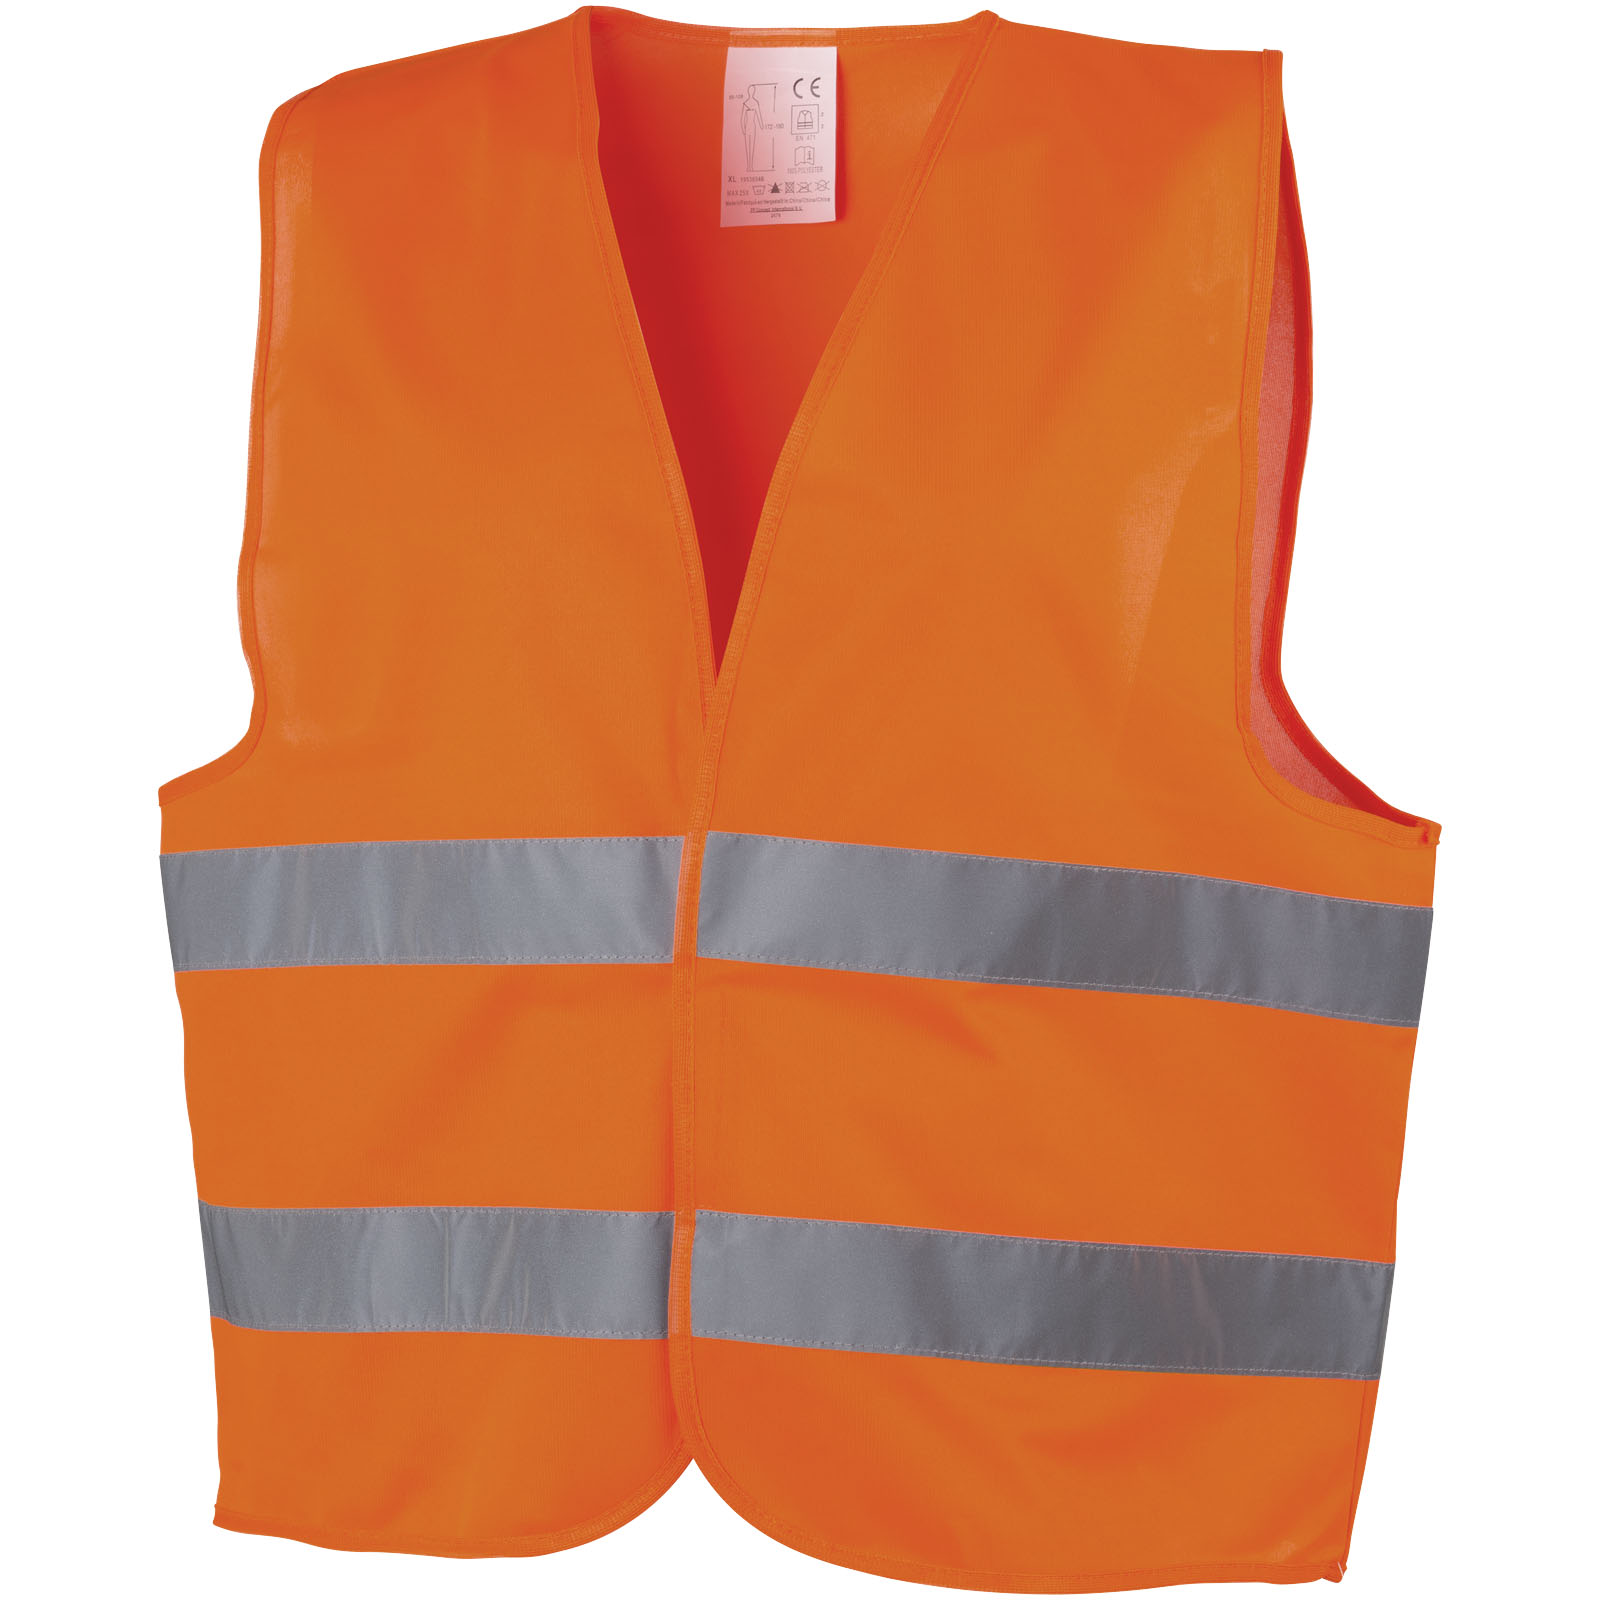 Advertising Safety Vests - RFX™ See-me XL safety vest for professional use - 0